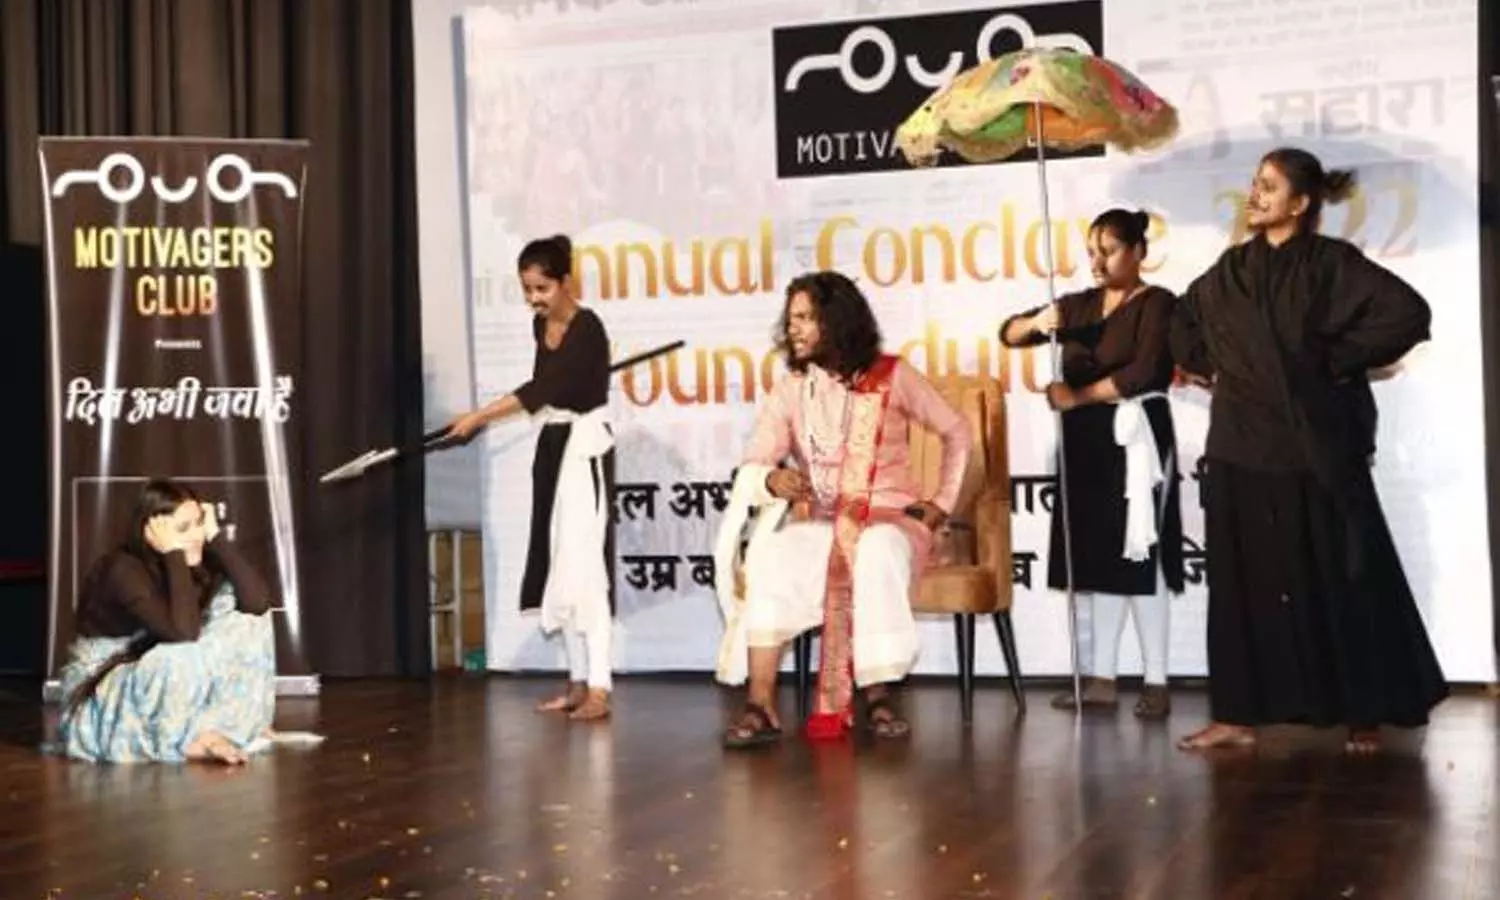 Senior citizens of Motivators in Lucknow spread fashion on stage with youth